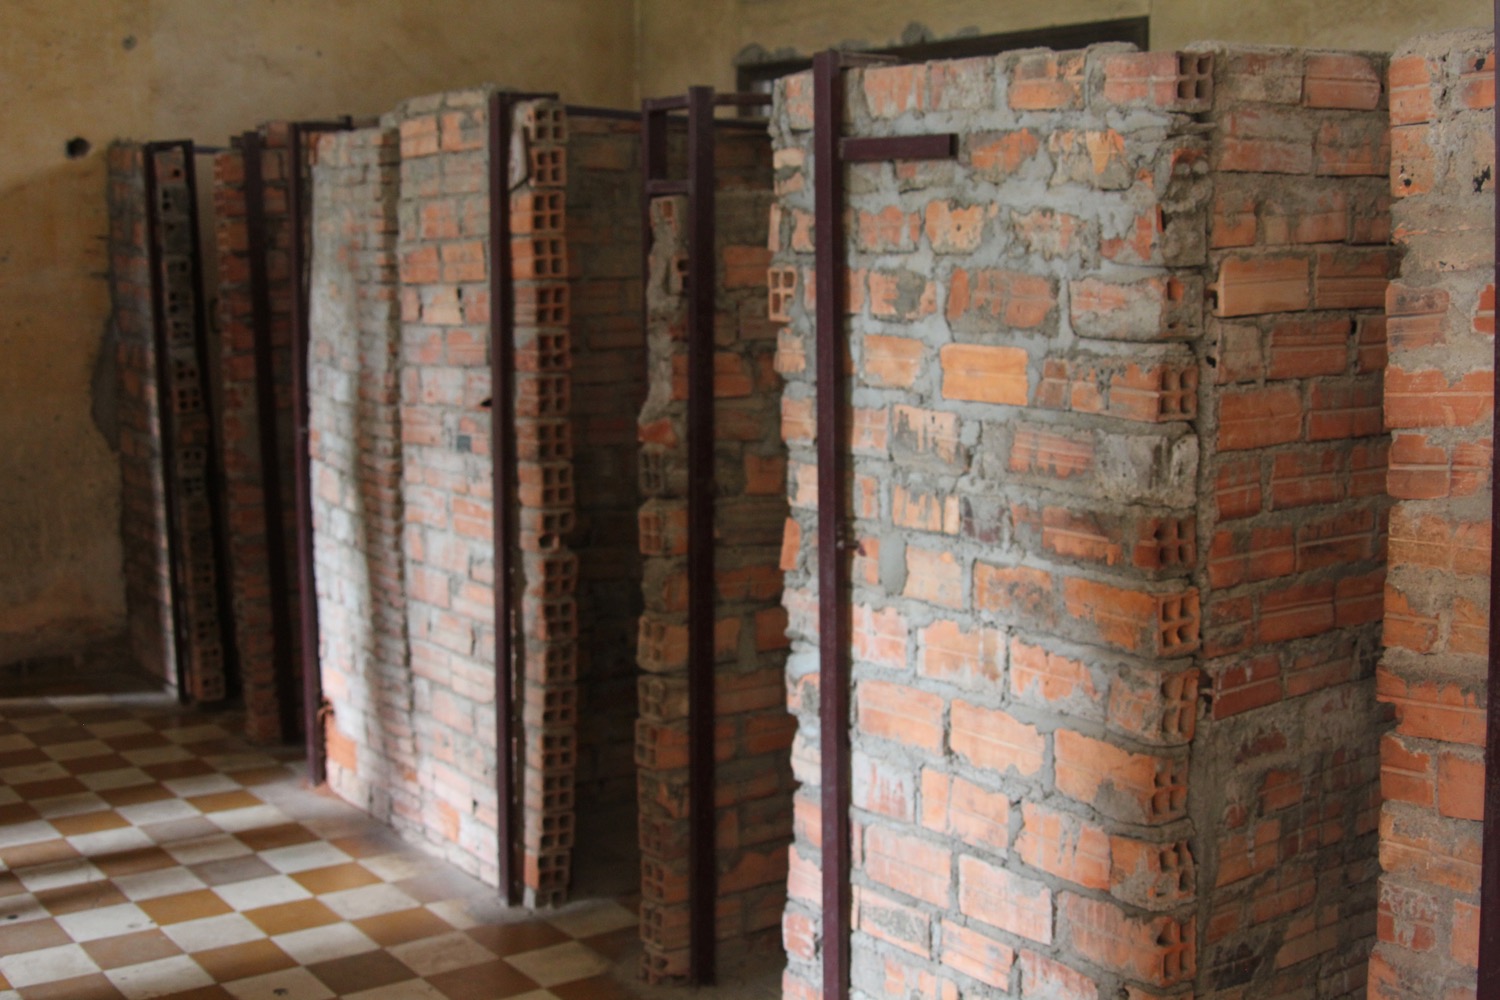 Tuol Sleng Genocide Museum - 16